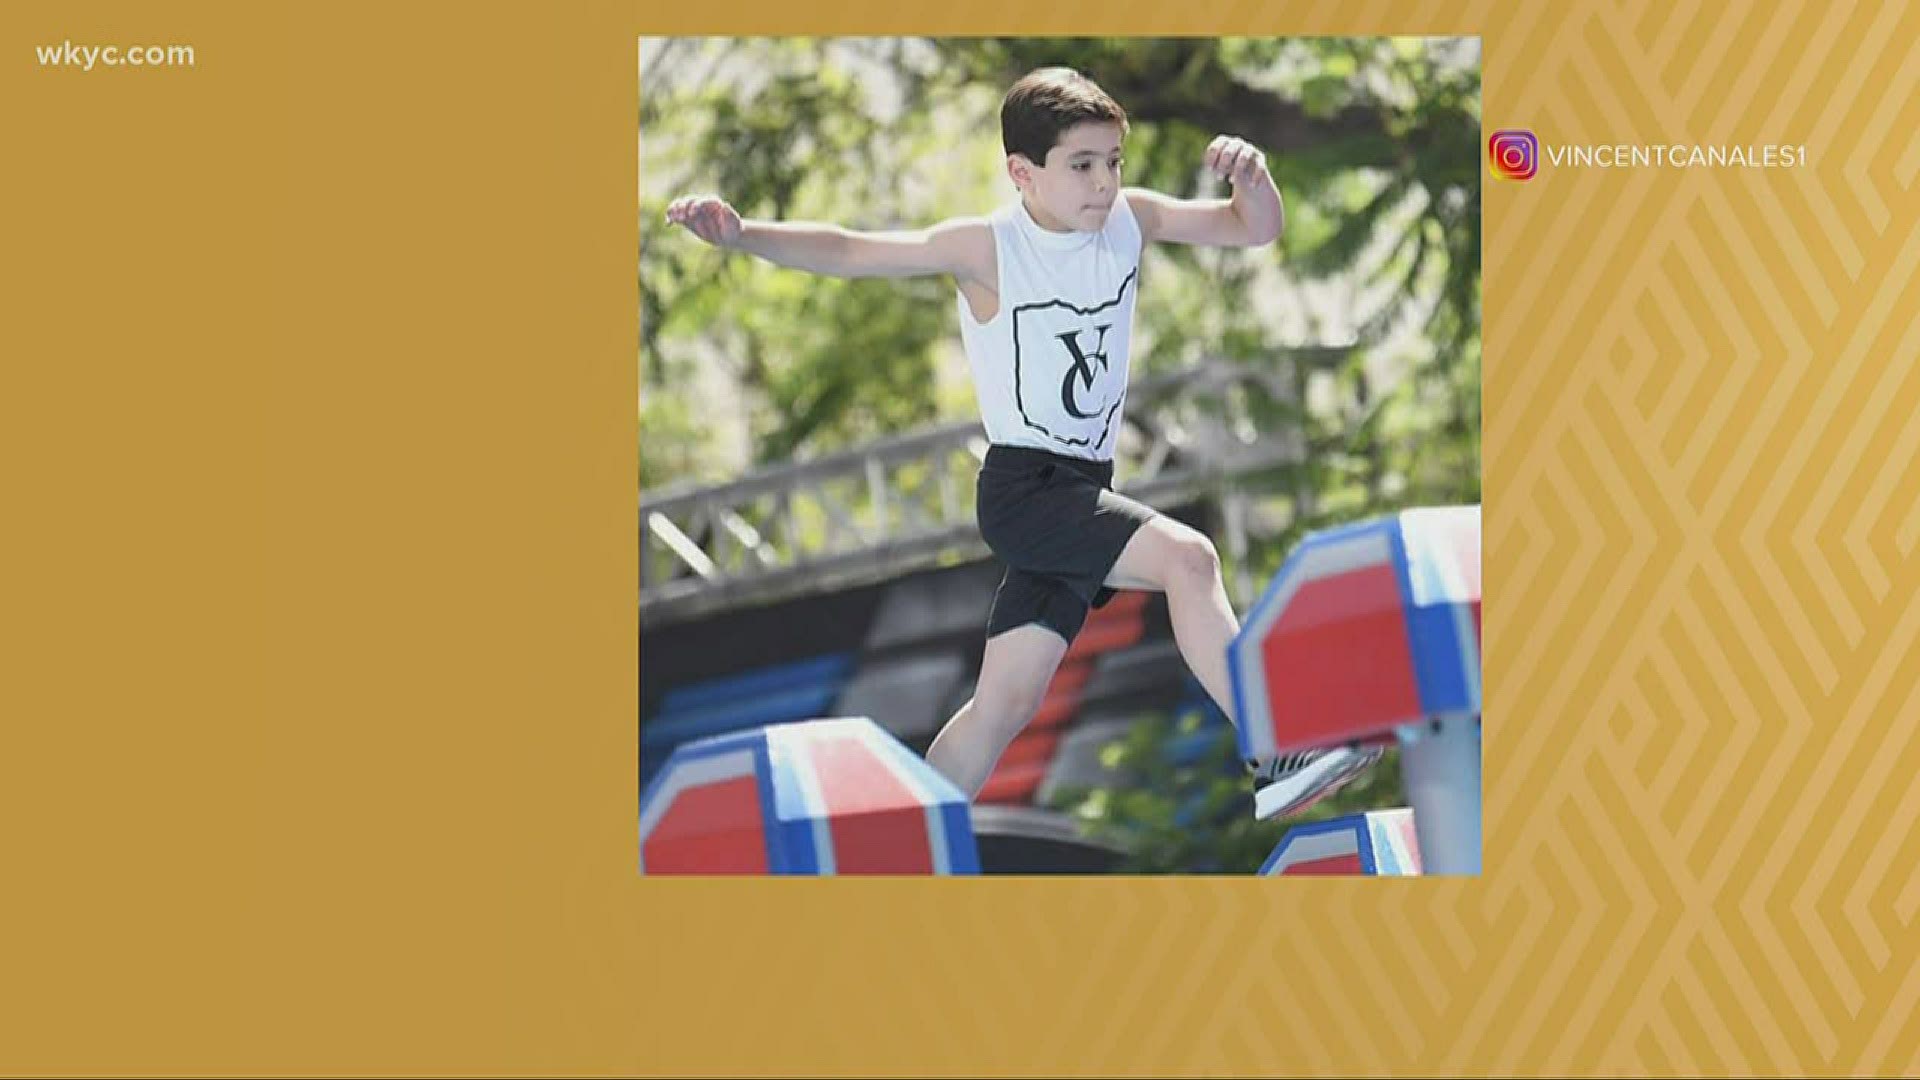 Vincent Canales will compete in the 9 & 10-year-old division against three other kids from across the country, as they try and make it through the 10-stage obstacle.